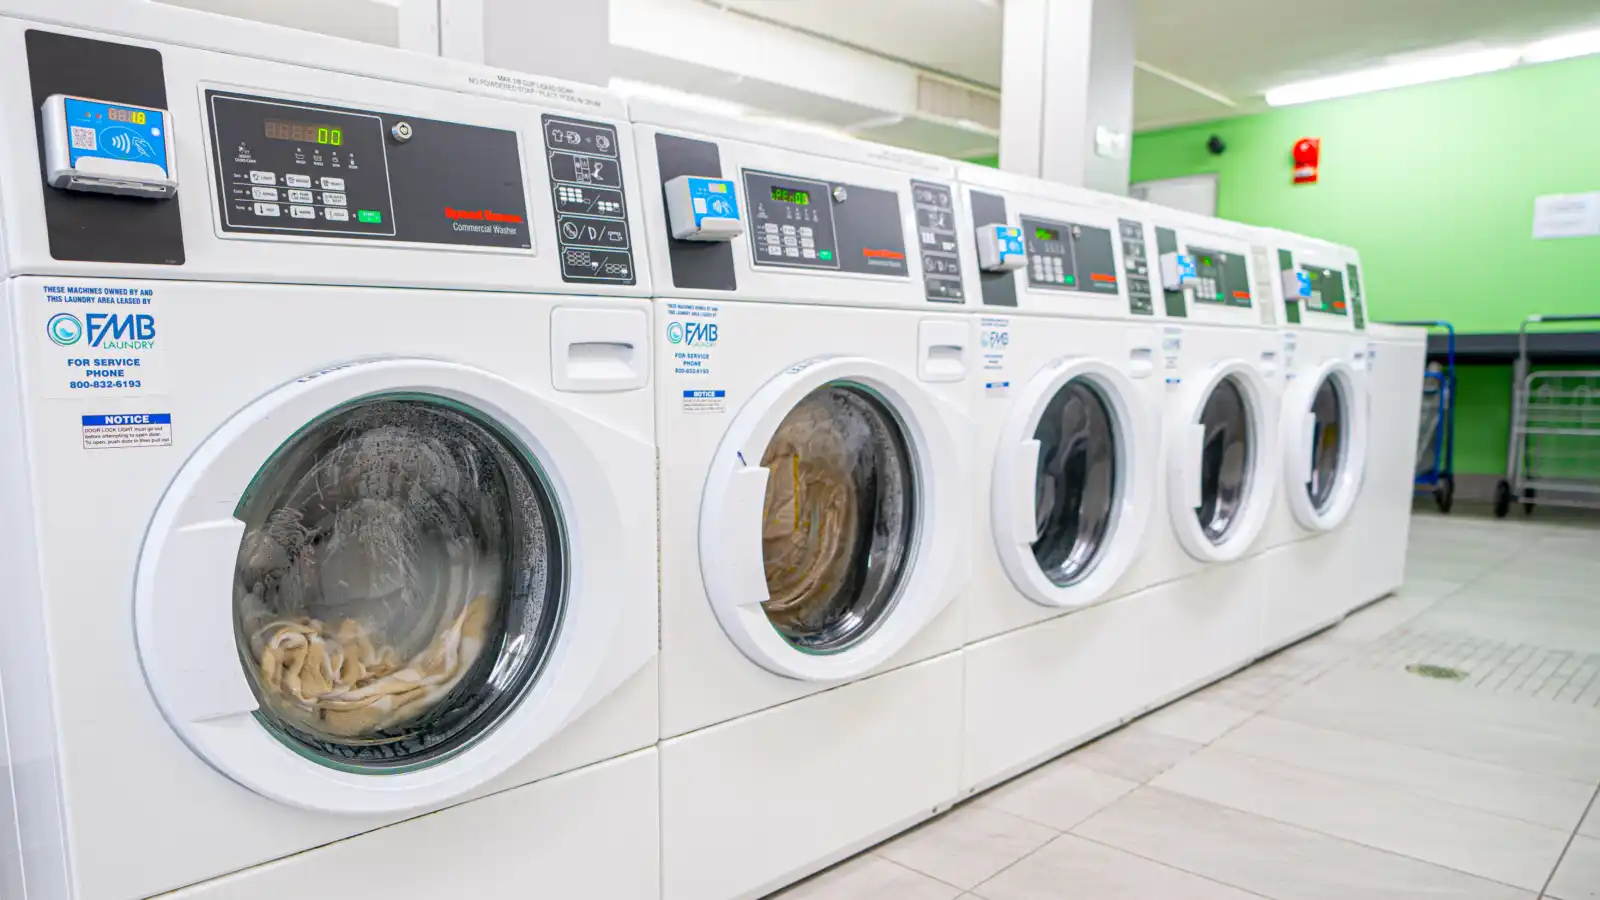 Coin-operated laundromats still big part of many people's lives